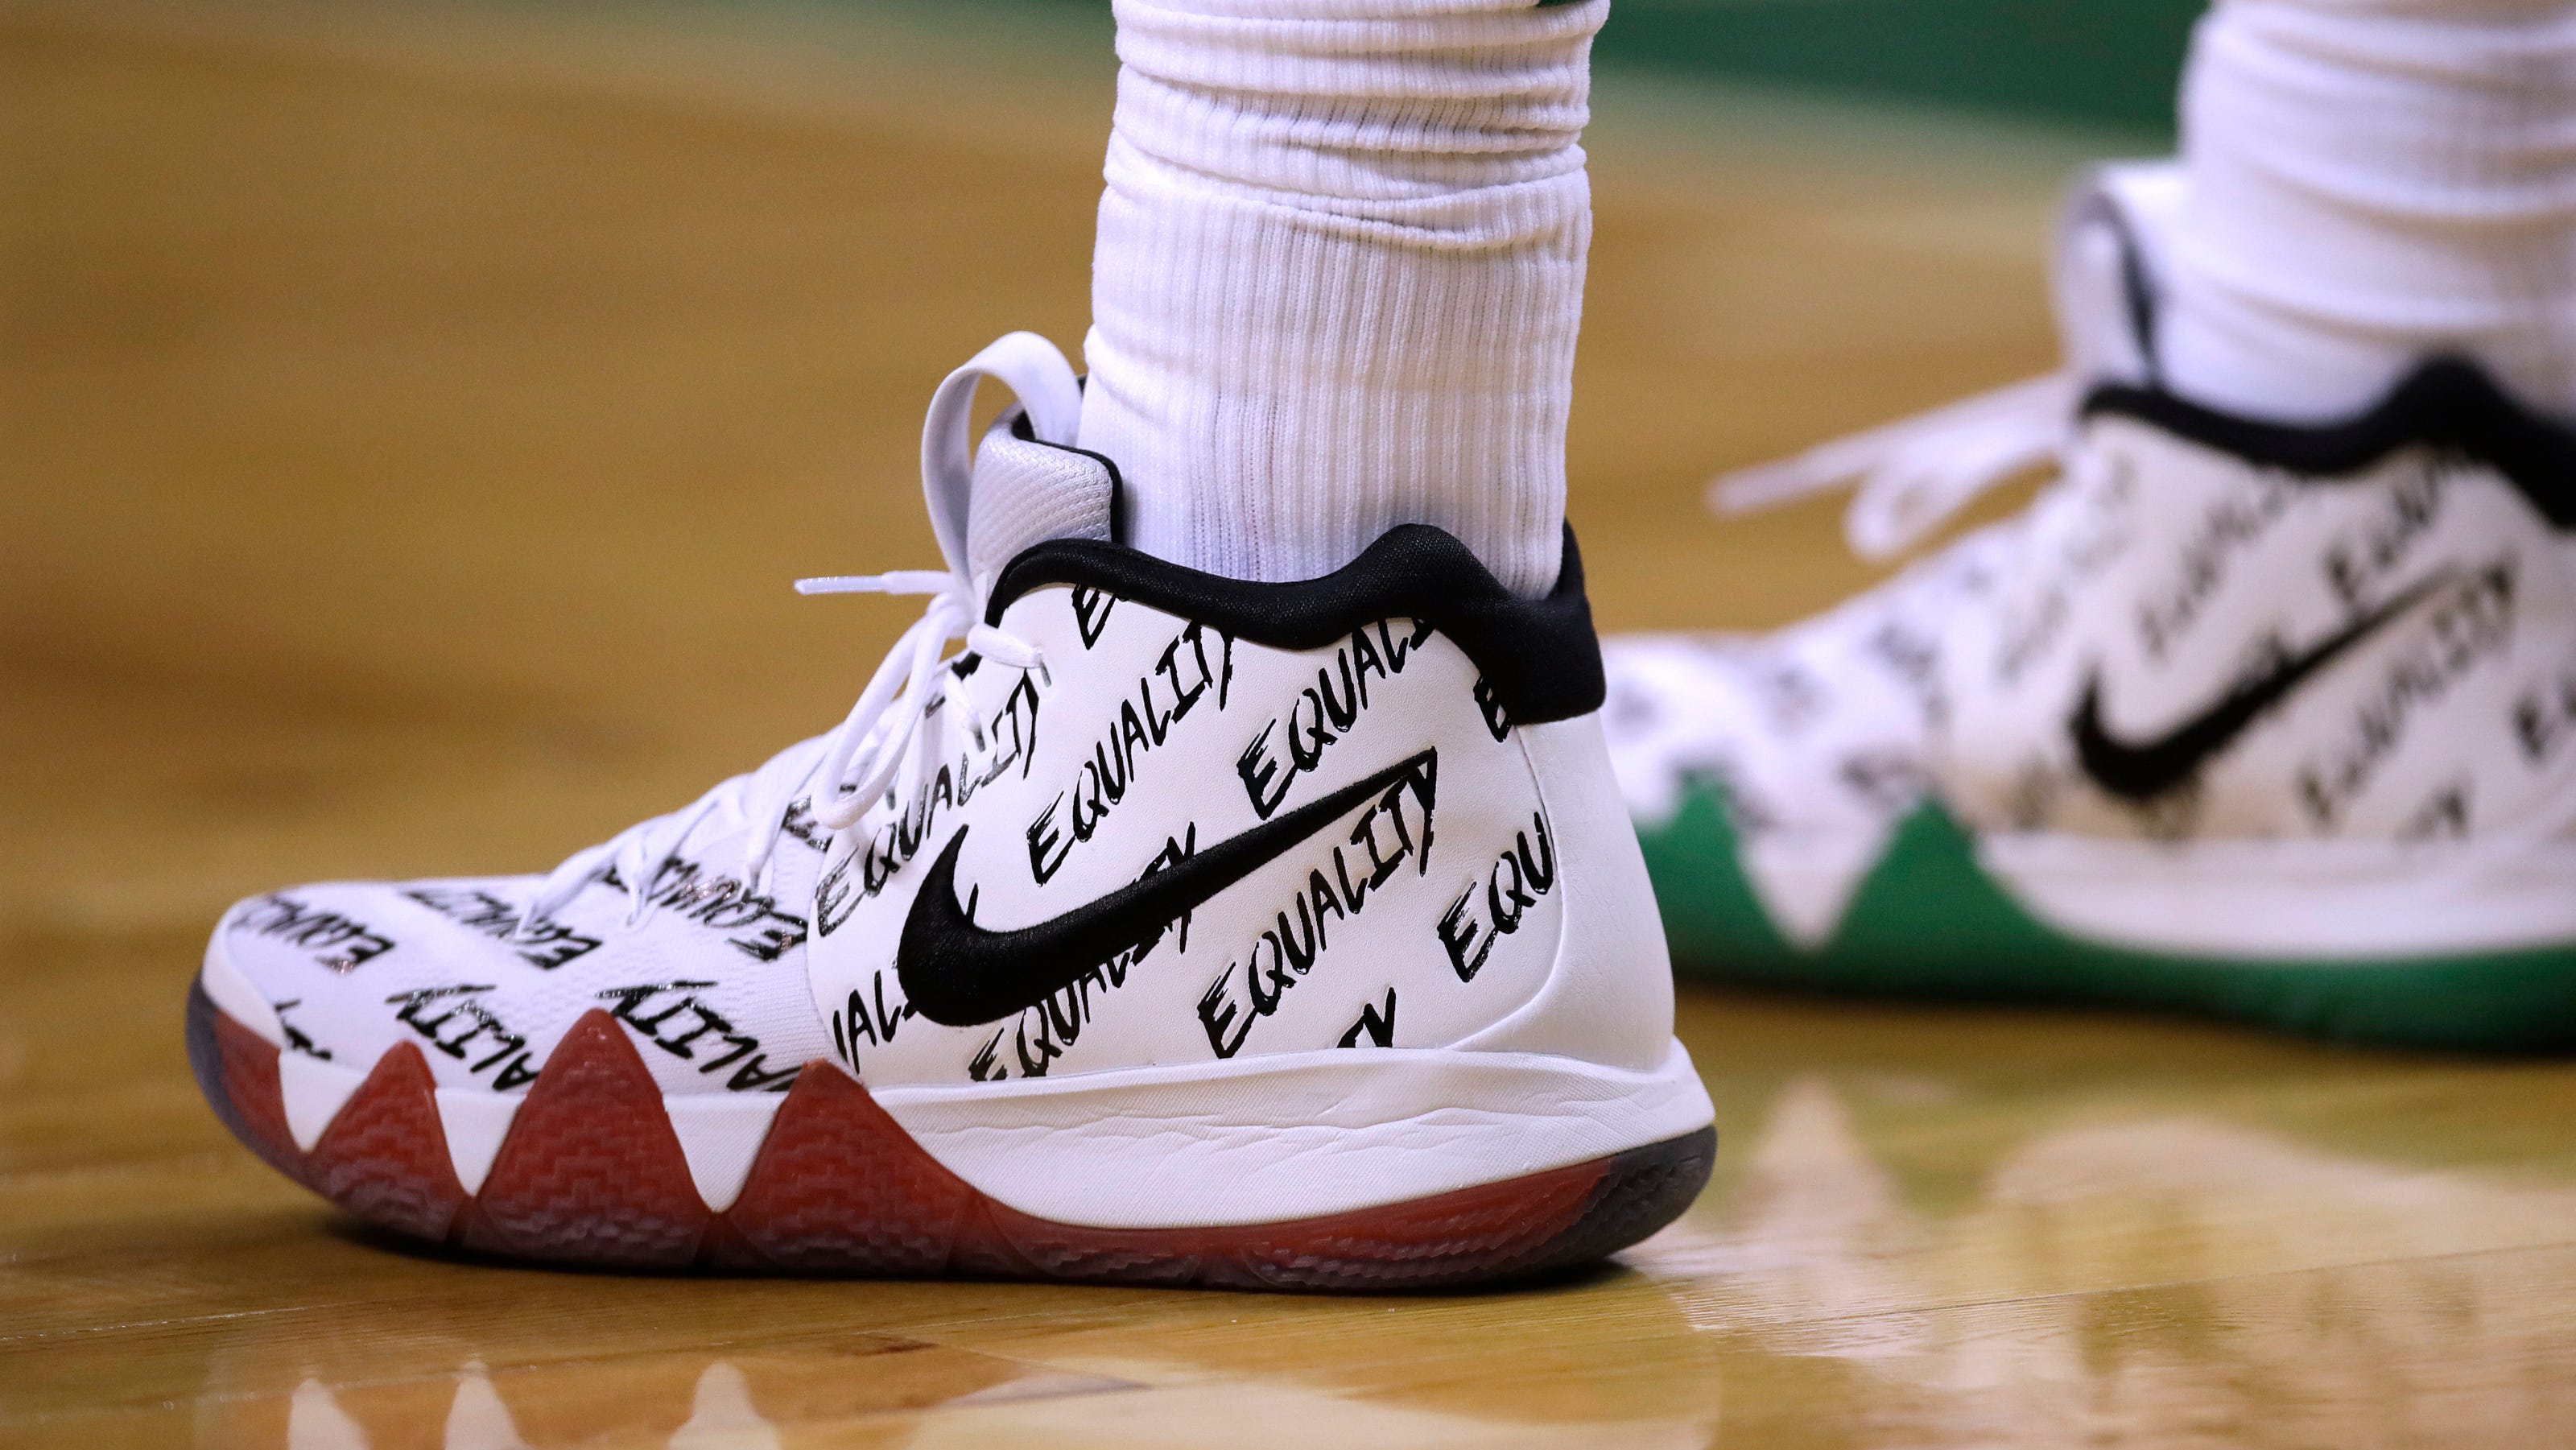 Nba Players Step Toward Equality In Limited Edition Sneakers